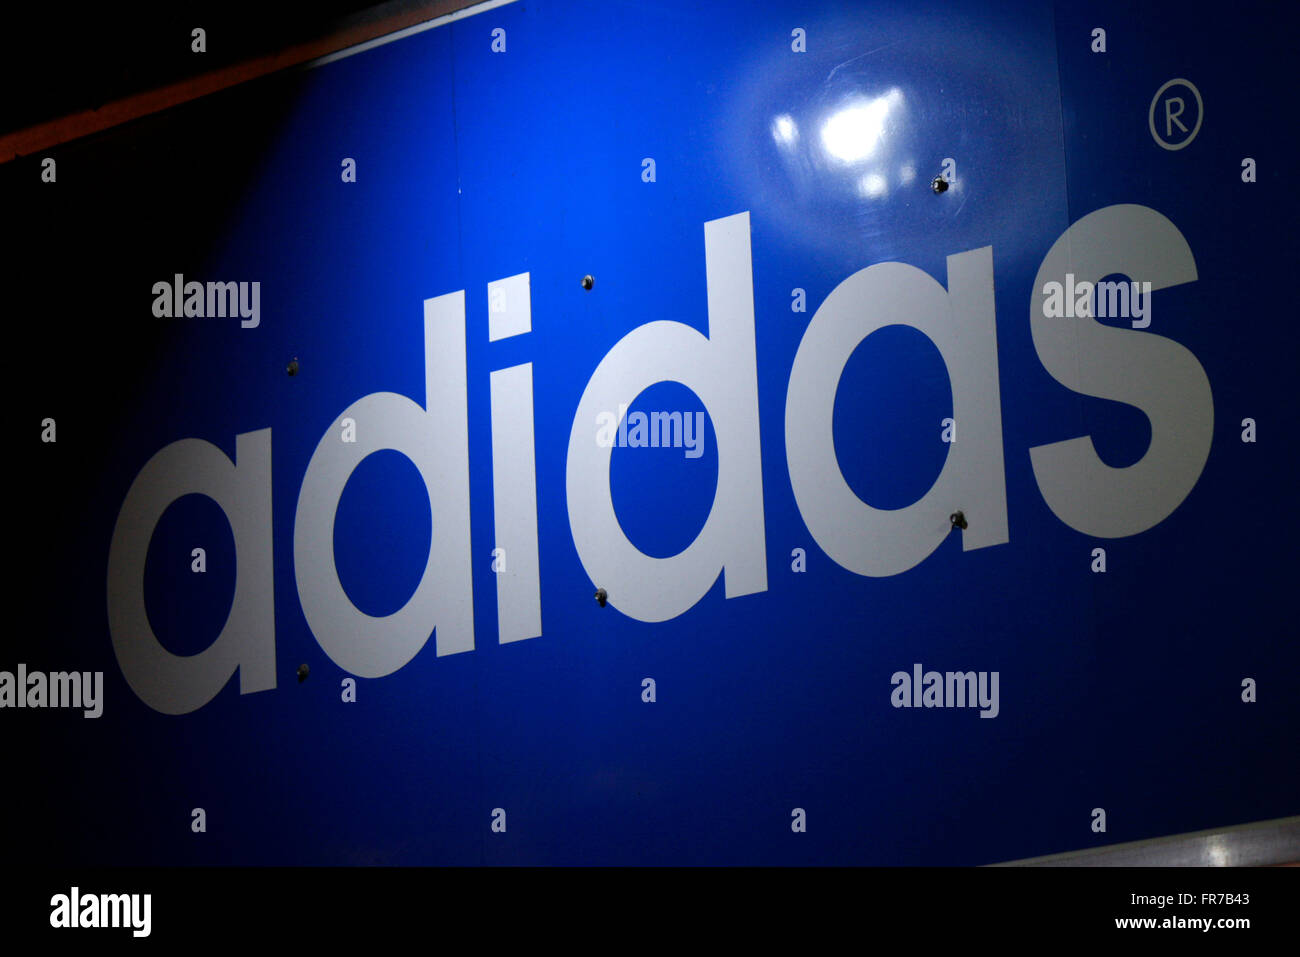 Markenname : 'Adidas', Berlin. Banque D'Images